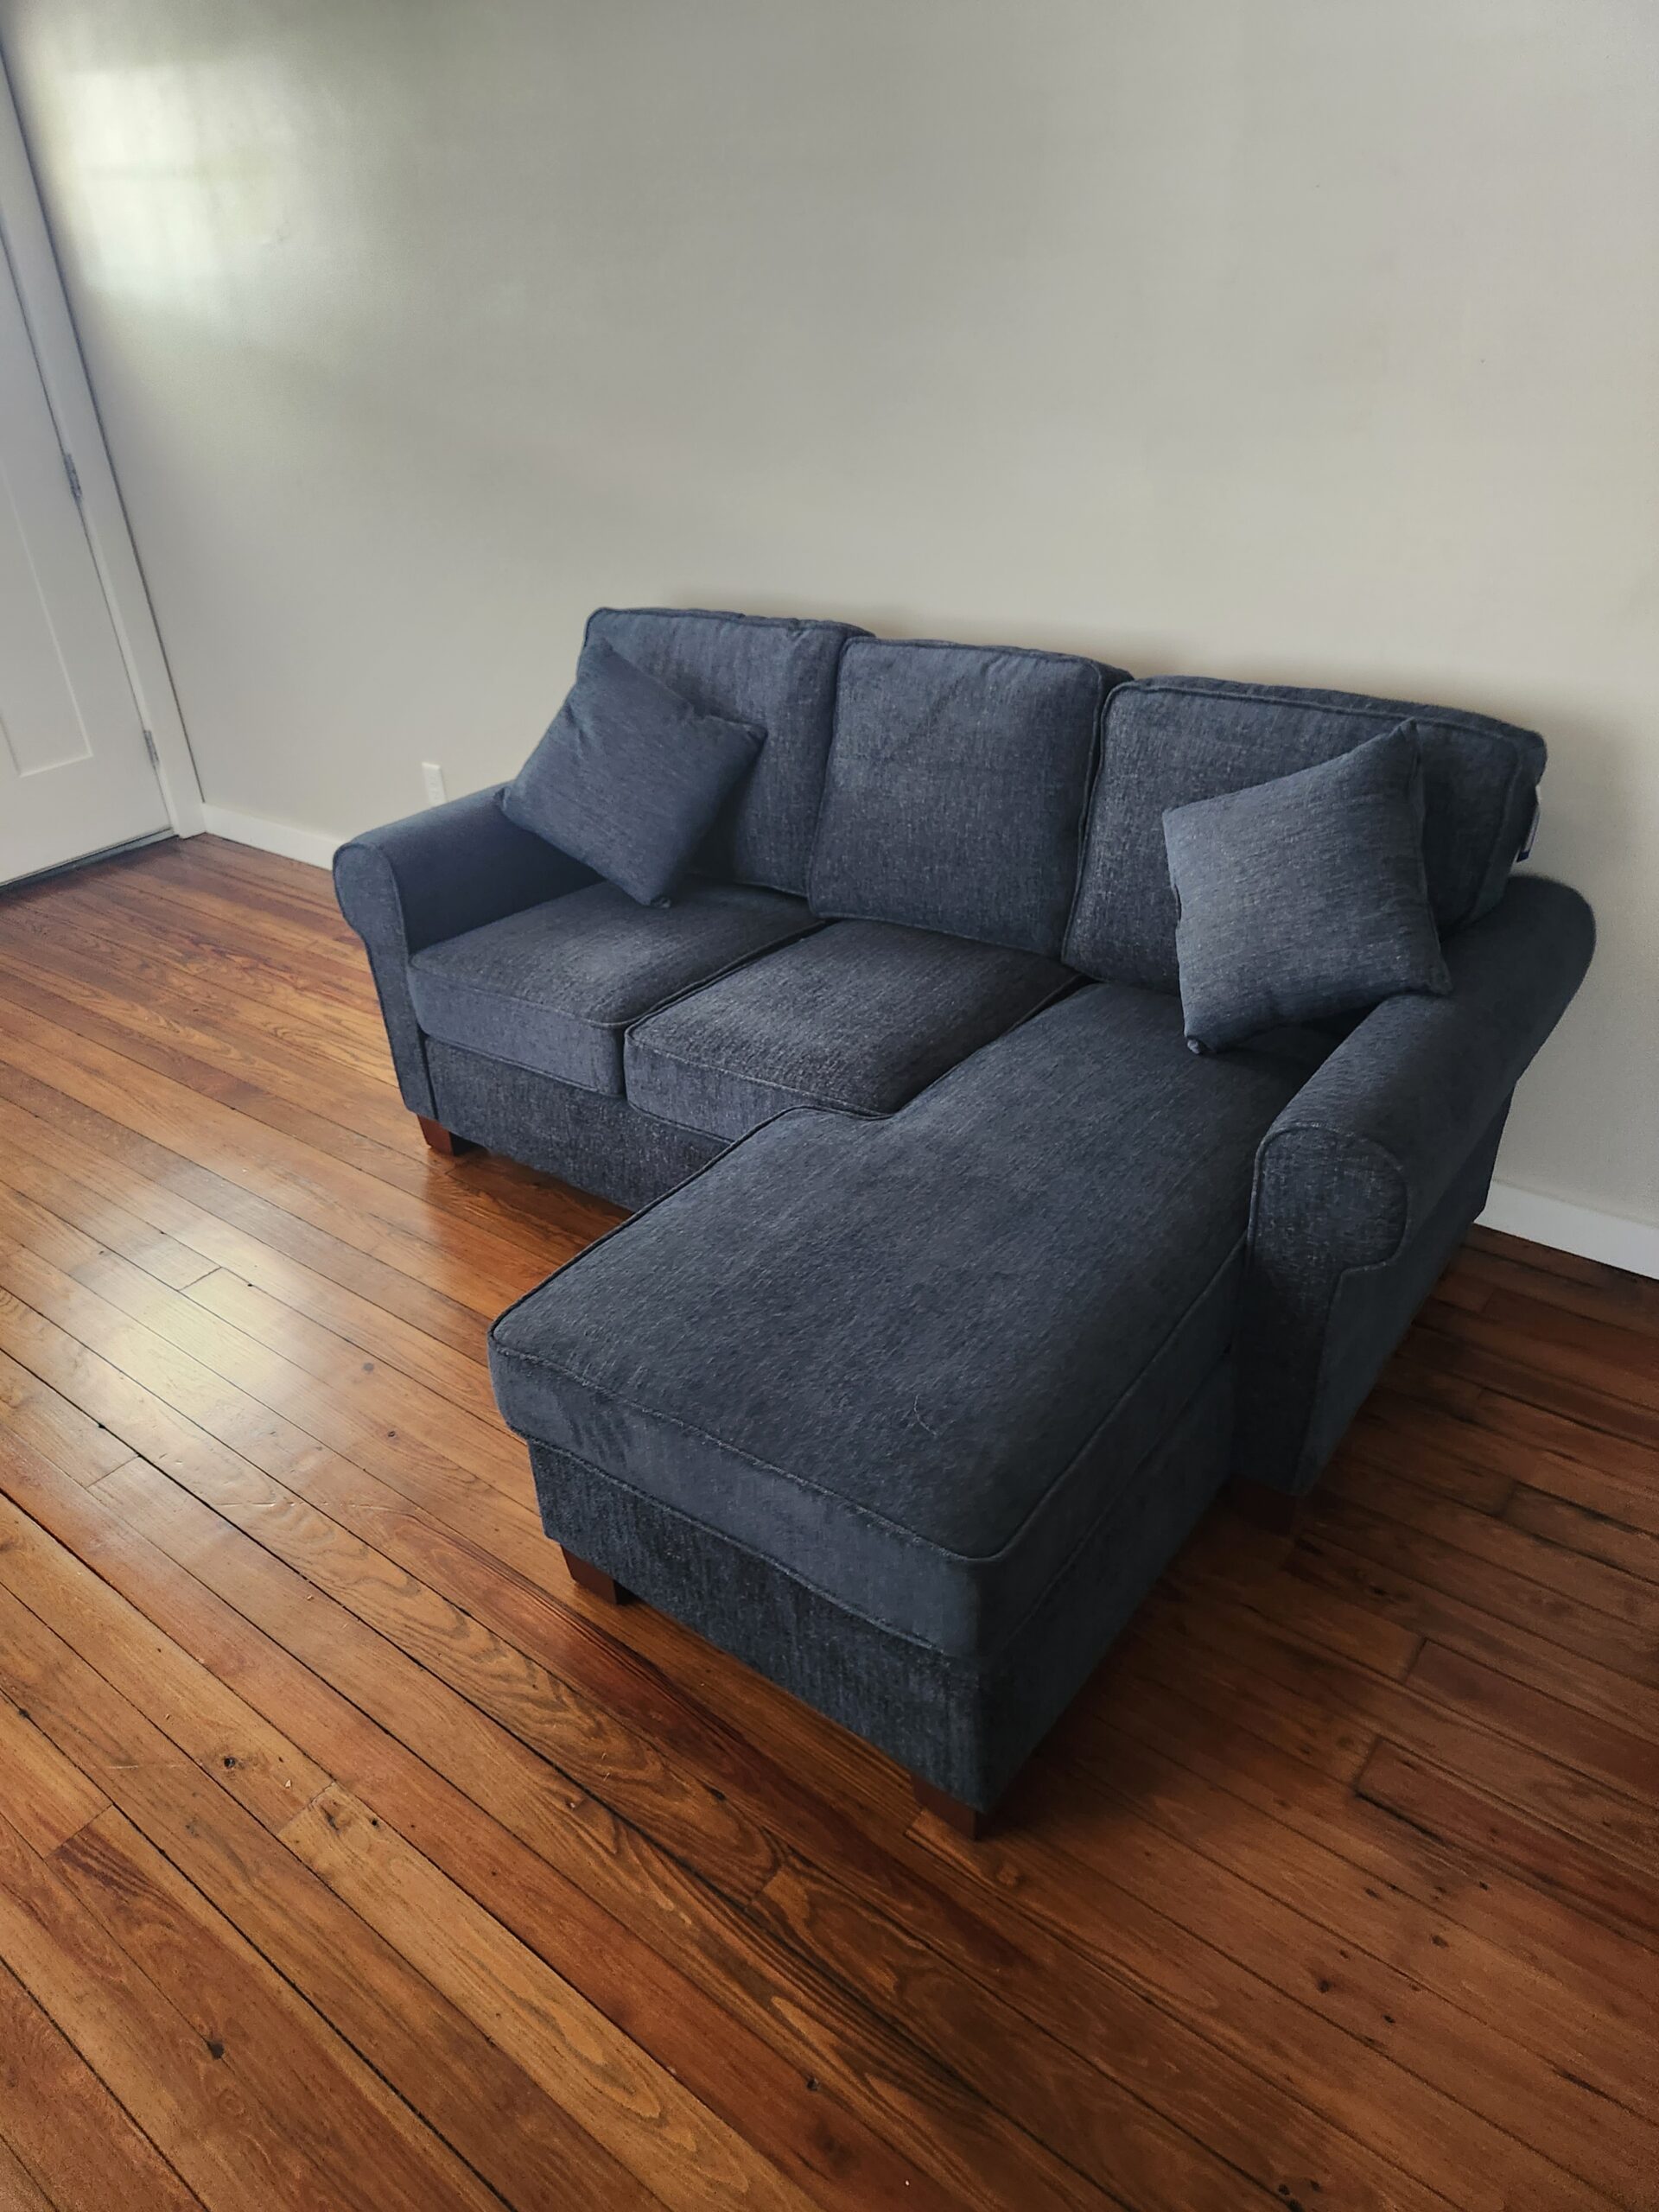 Get a new Comfy Couch that Looks Great too. See what people are Buying